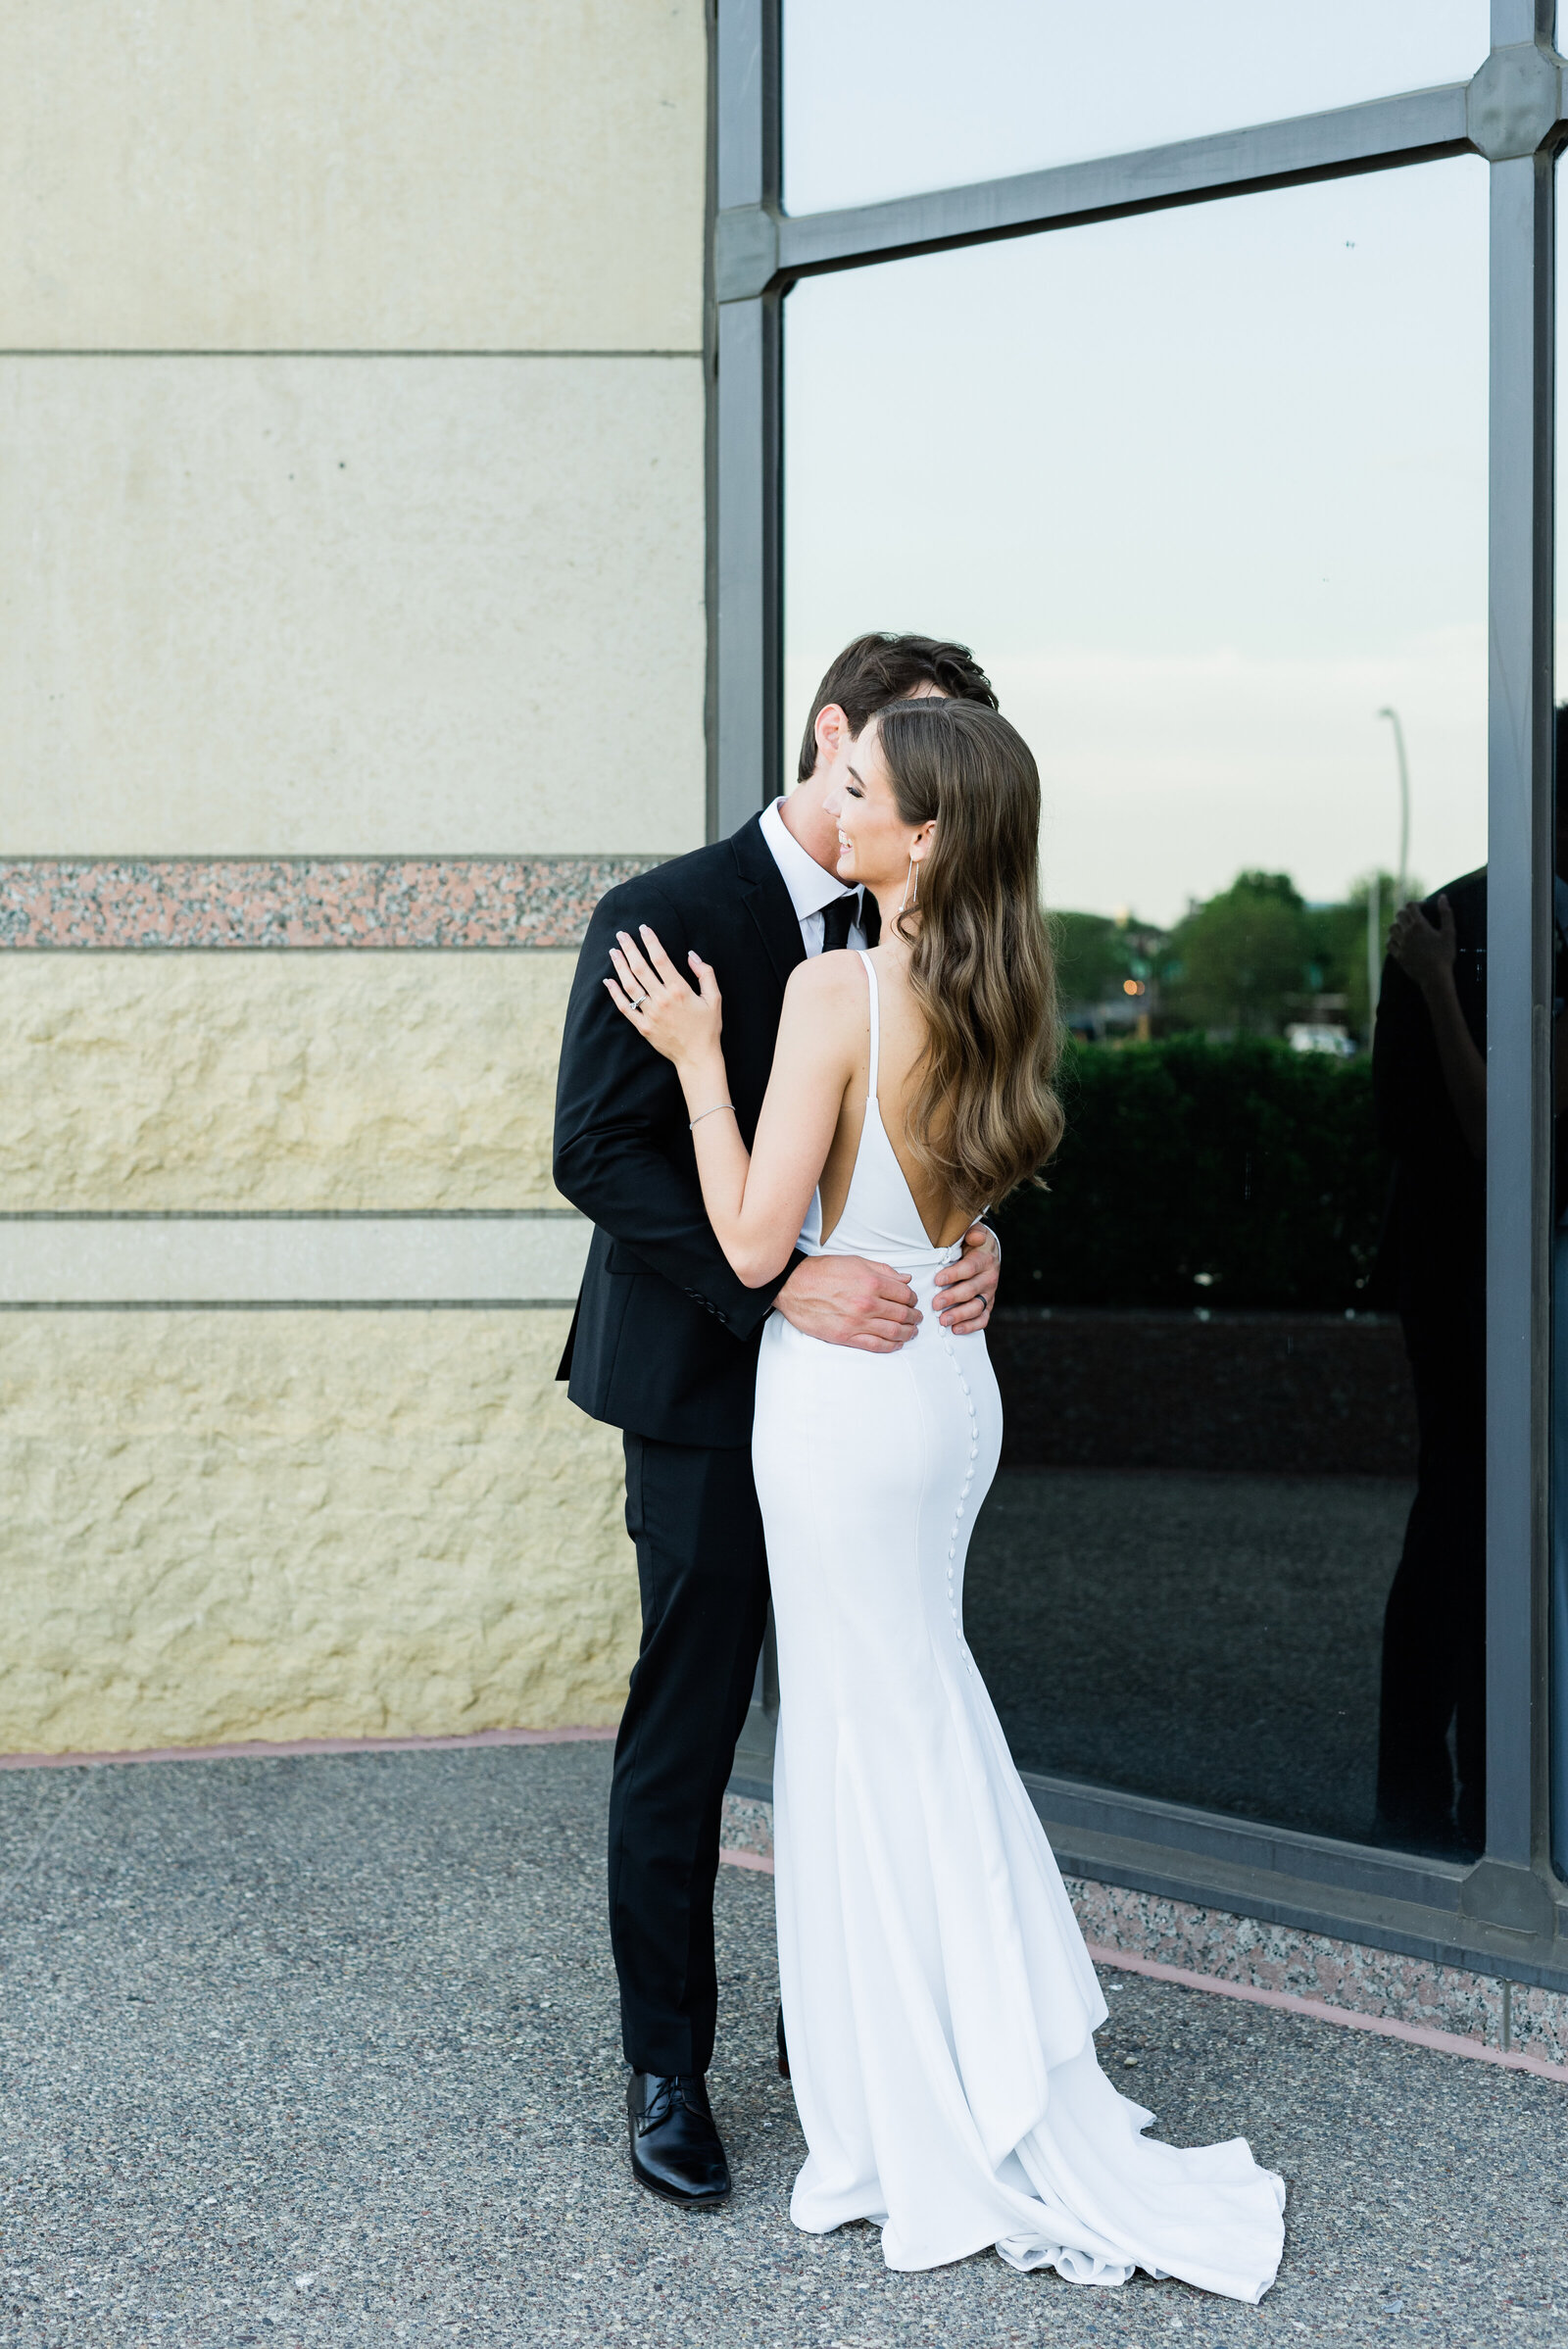 Wedding couple sharing kiss in front of a large corner window